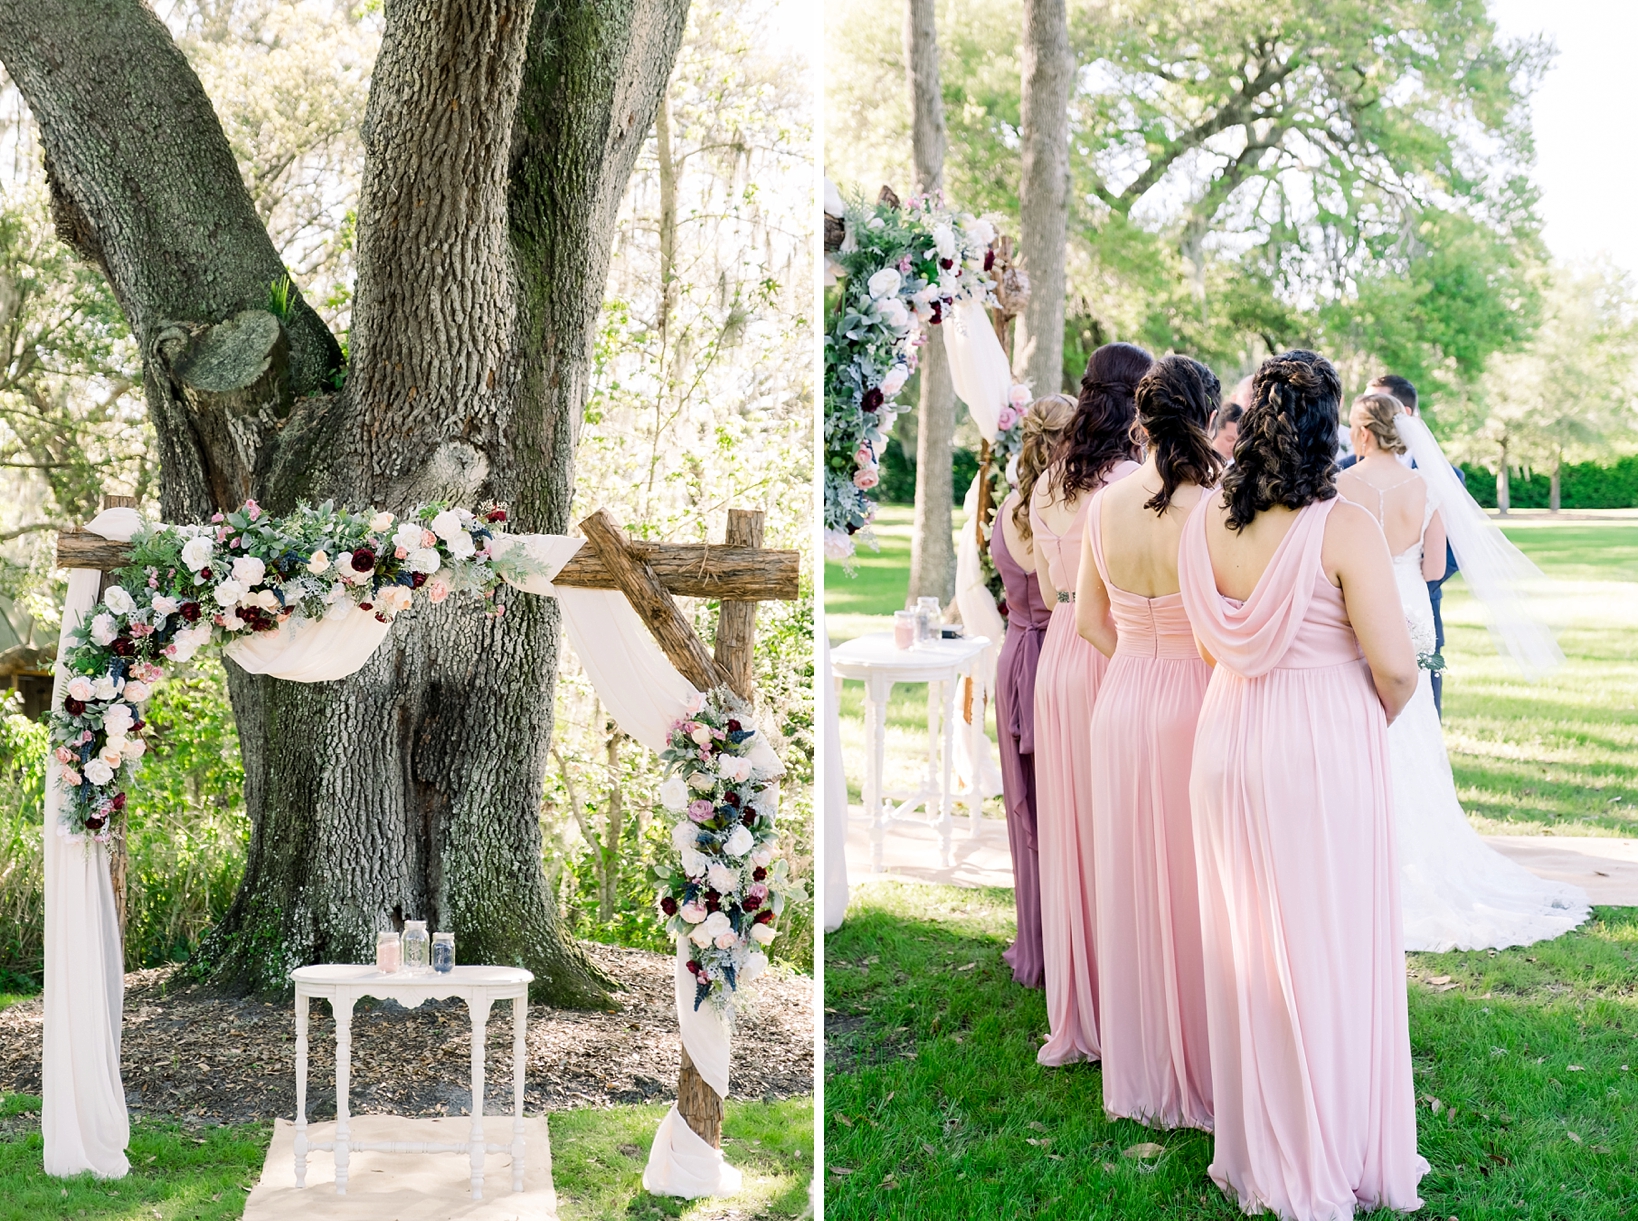 The wedding arch made of rough wood and drapery and the bridesmaids dresses in different shades of colors